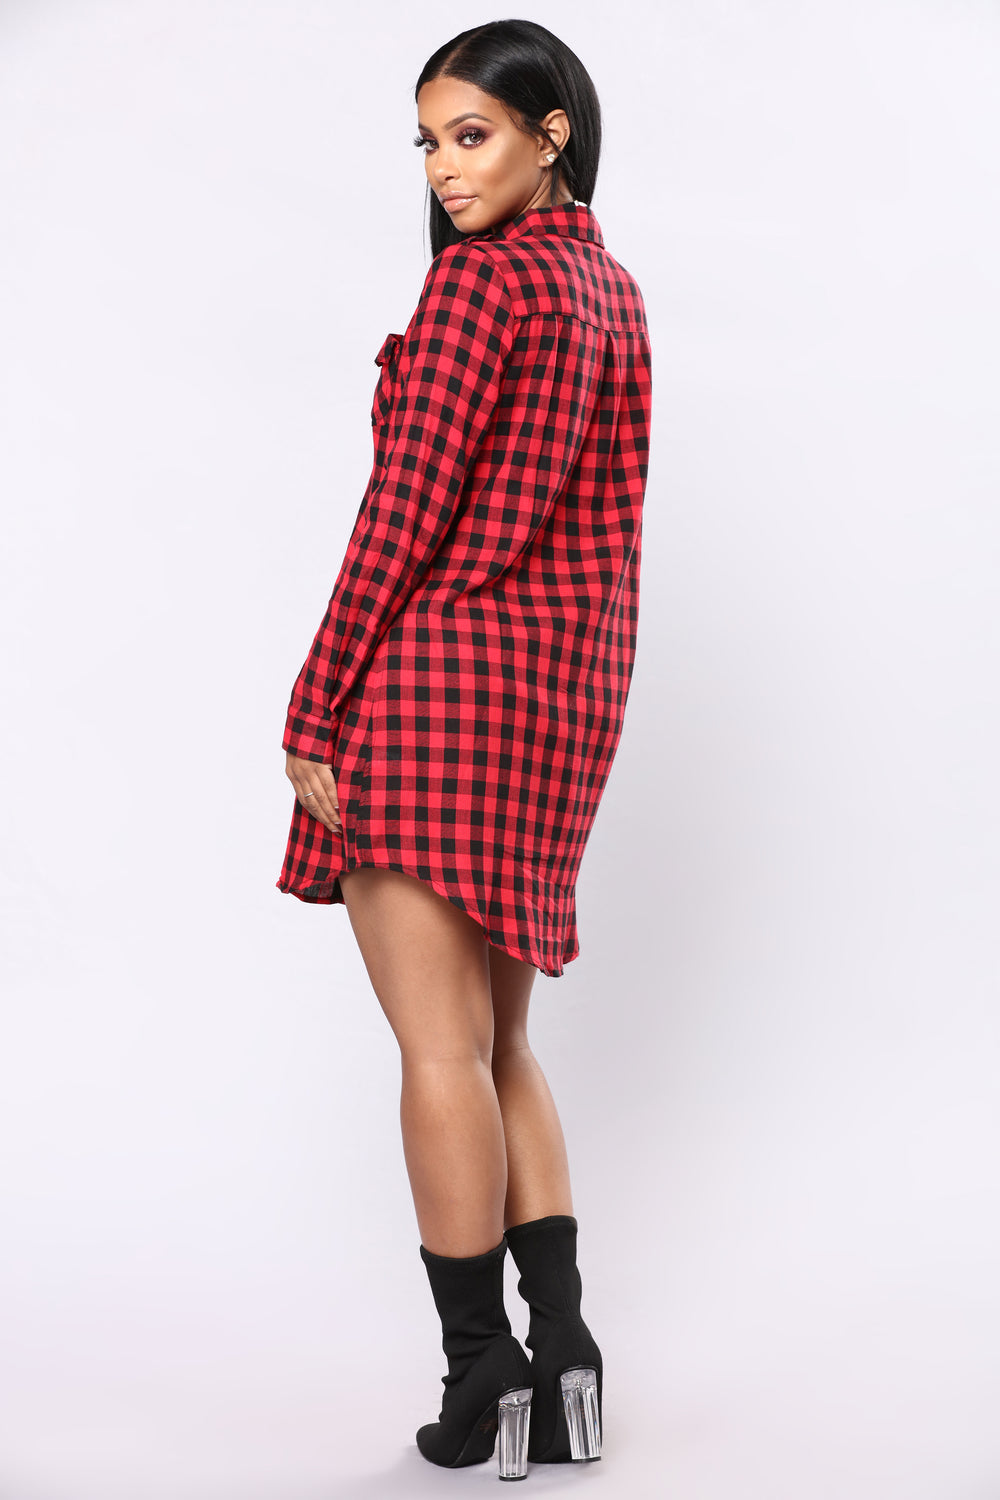 Small Town Visit Gingham Tunic - Red/Black